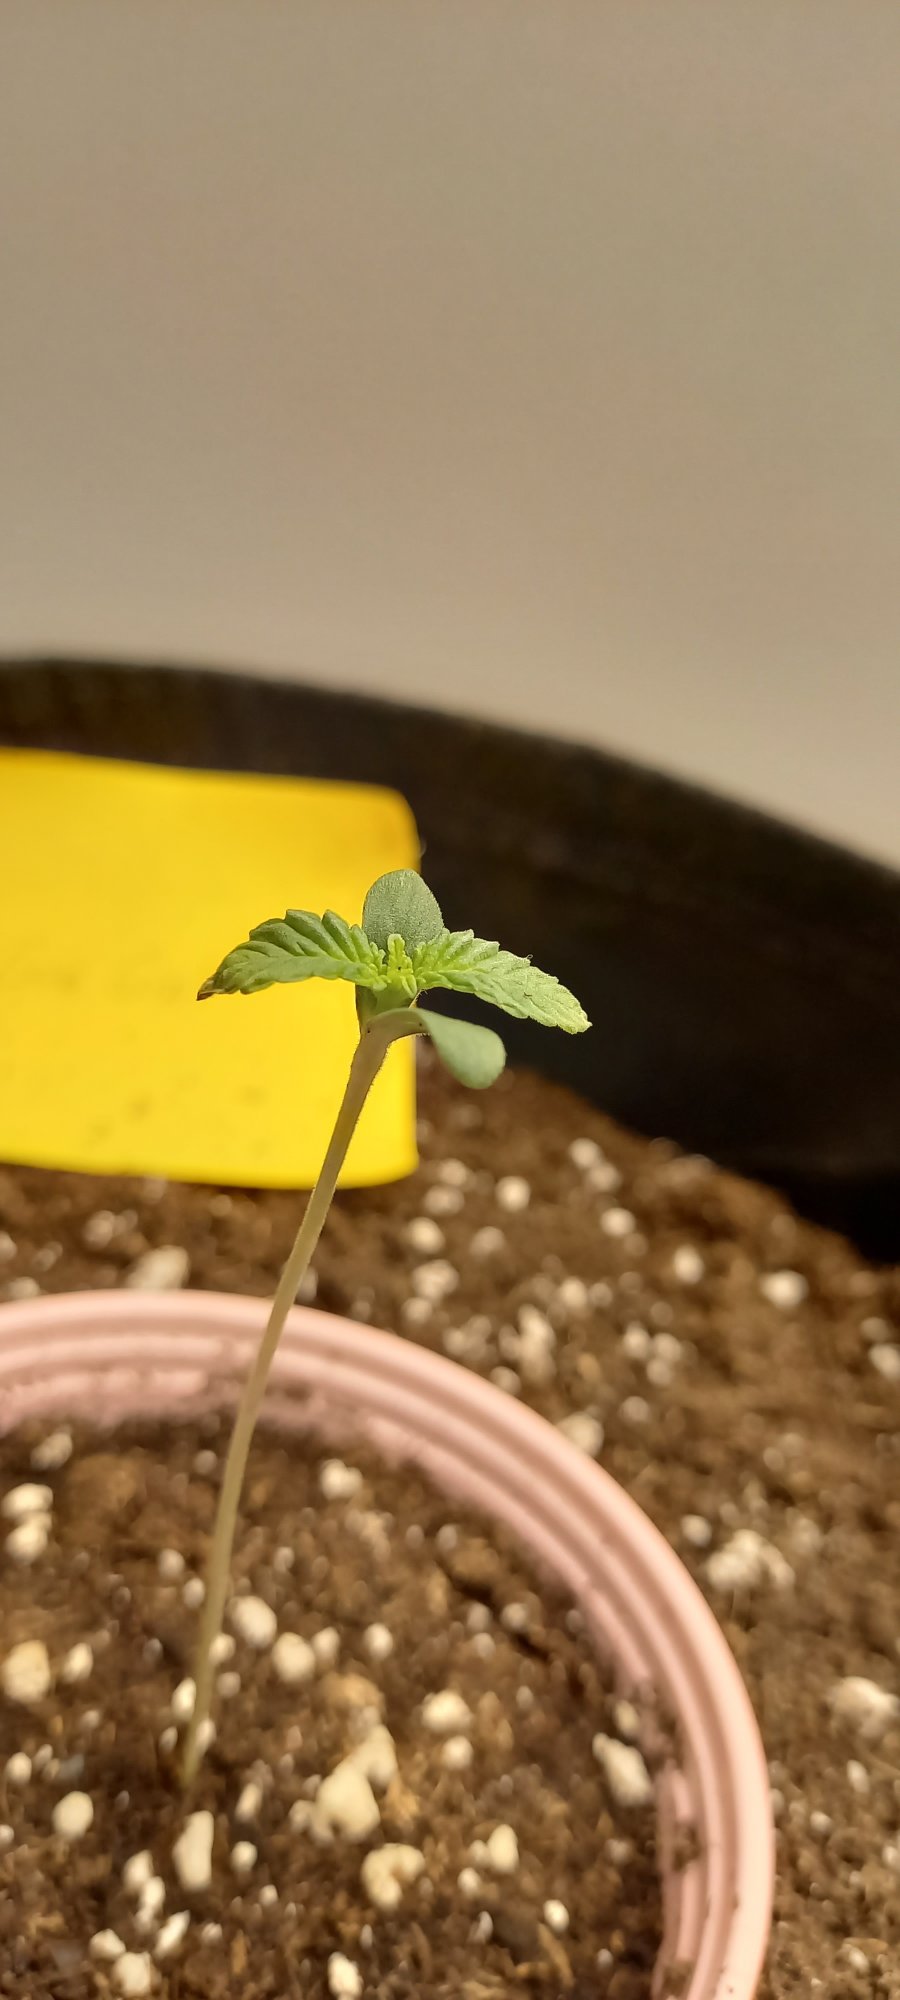 Seedling is stretching with burnt tips